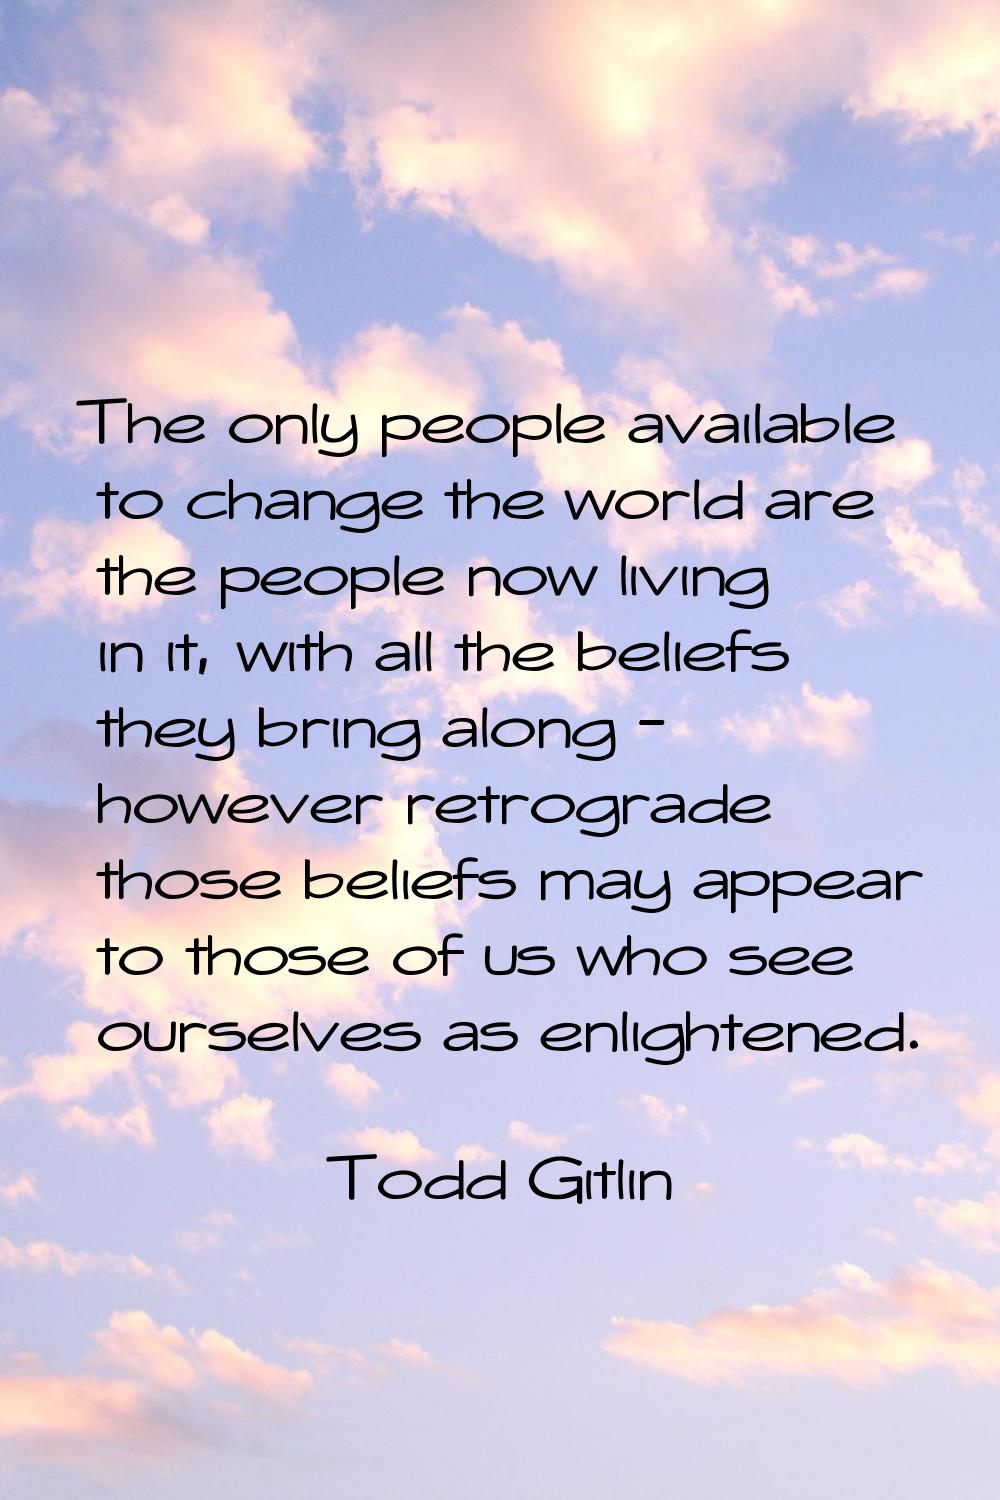 The only people available to change the world are the people now living in it, with all the beliefs